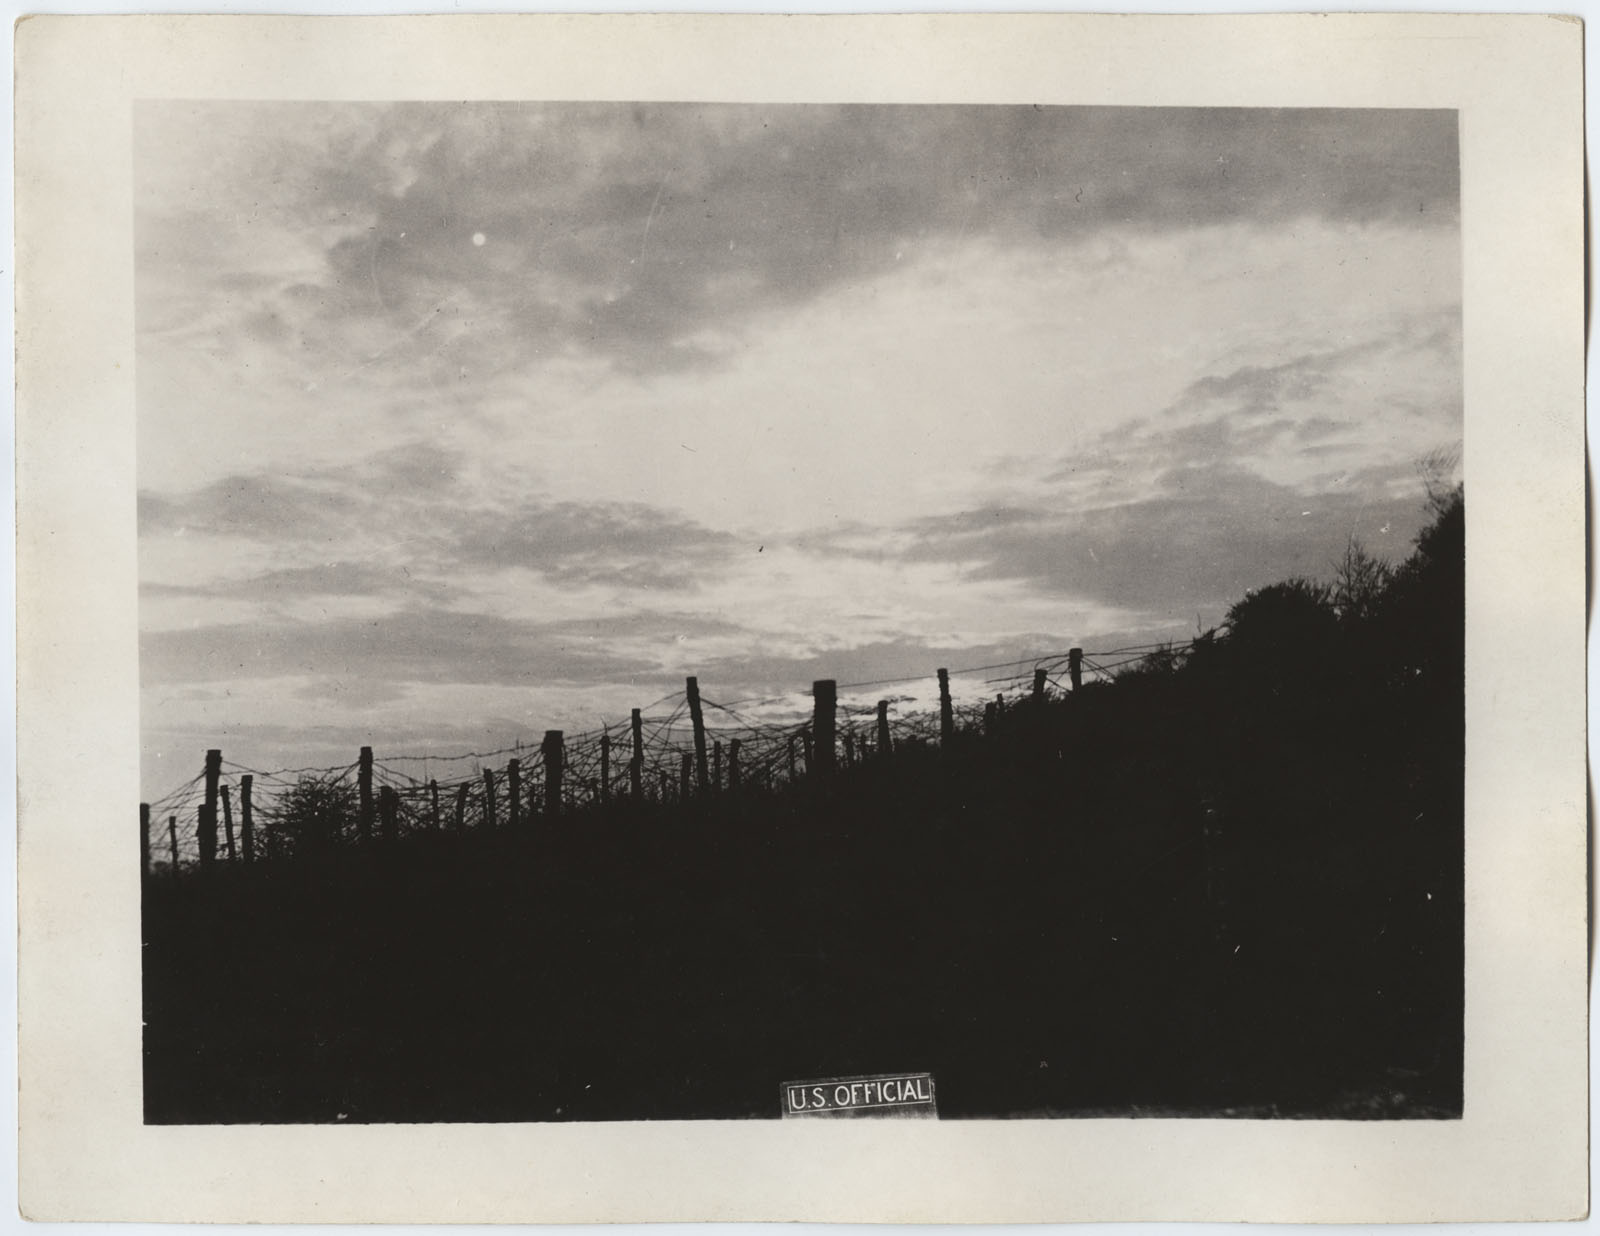 Black and white photograph. A hillside crowned with barbed wire fencing, silhouetted against the sky